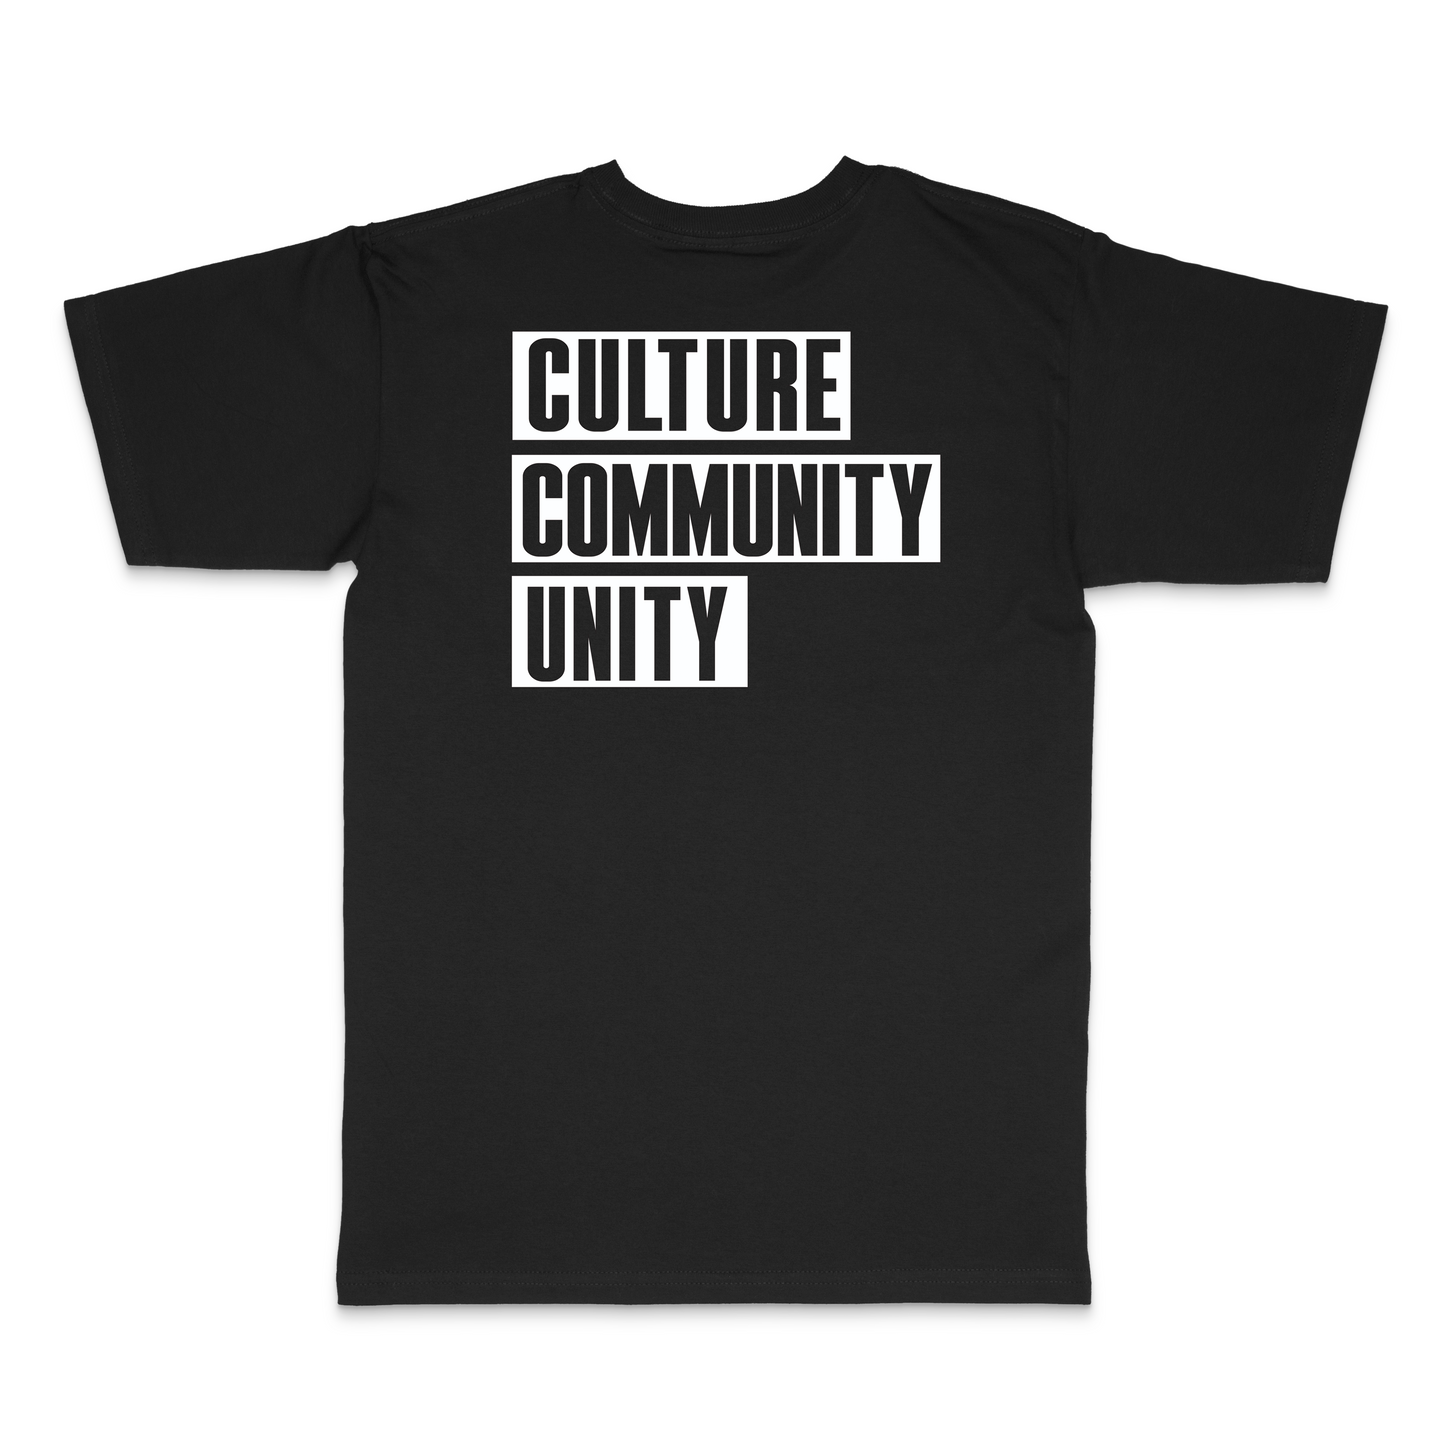 TOO STRONG UNITED / CULTURE COMMUNITY UNITY / T.S: Black, White, Red, Black & Green